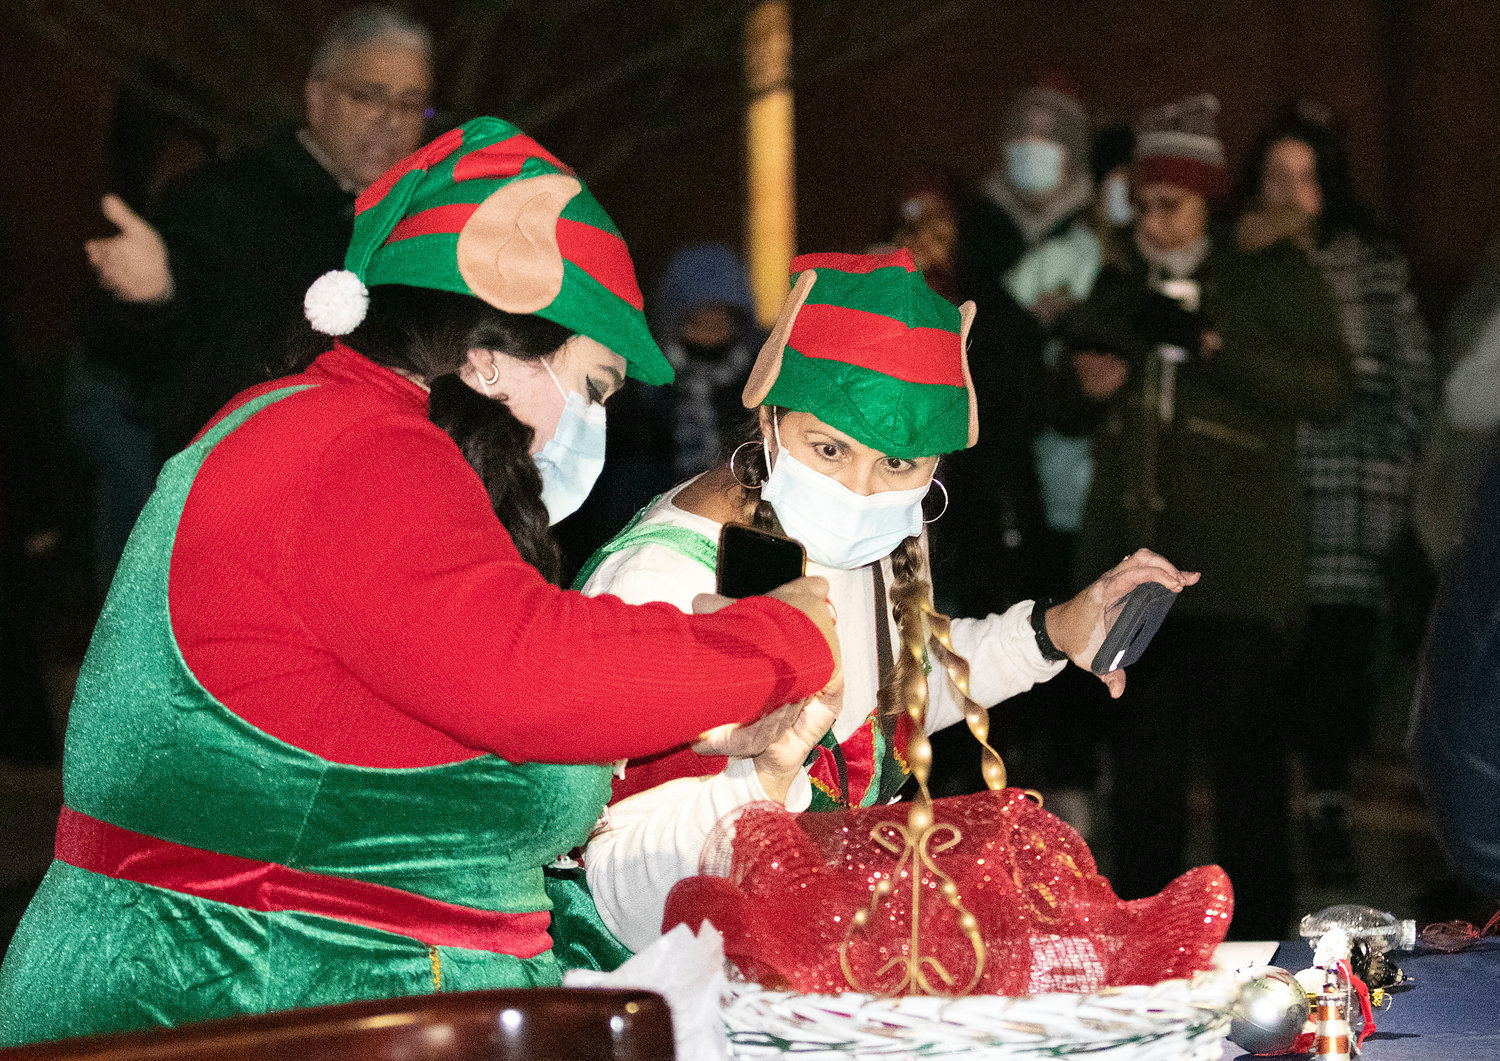 "Elves" Andrea Vegas (left) and Patricia Resende set up ornaments at the 2021 East Providence City Hall Tree Lighting ceremony.